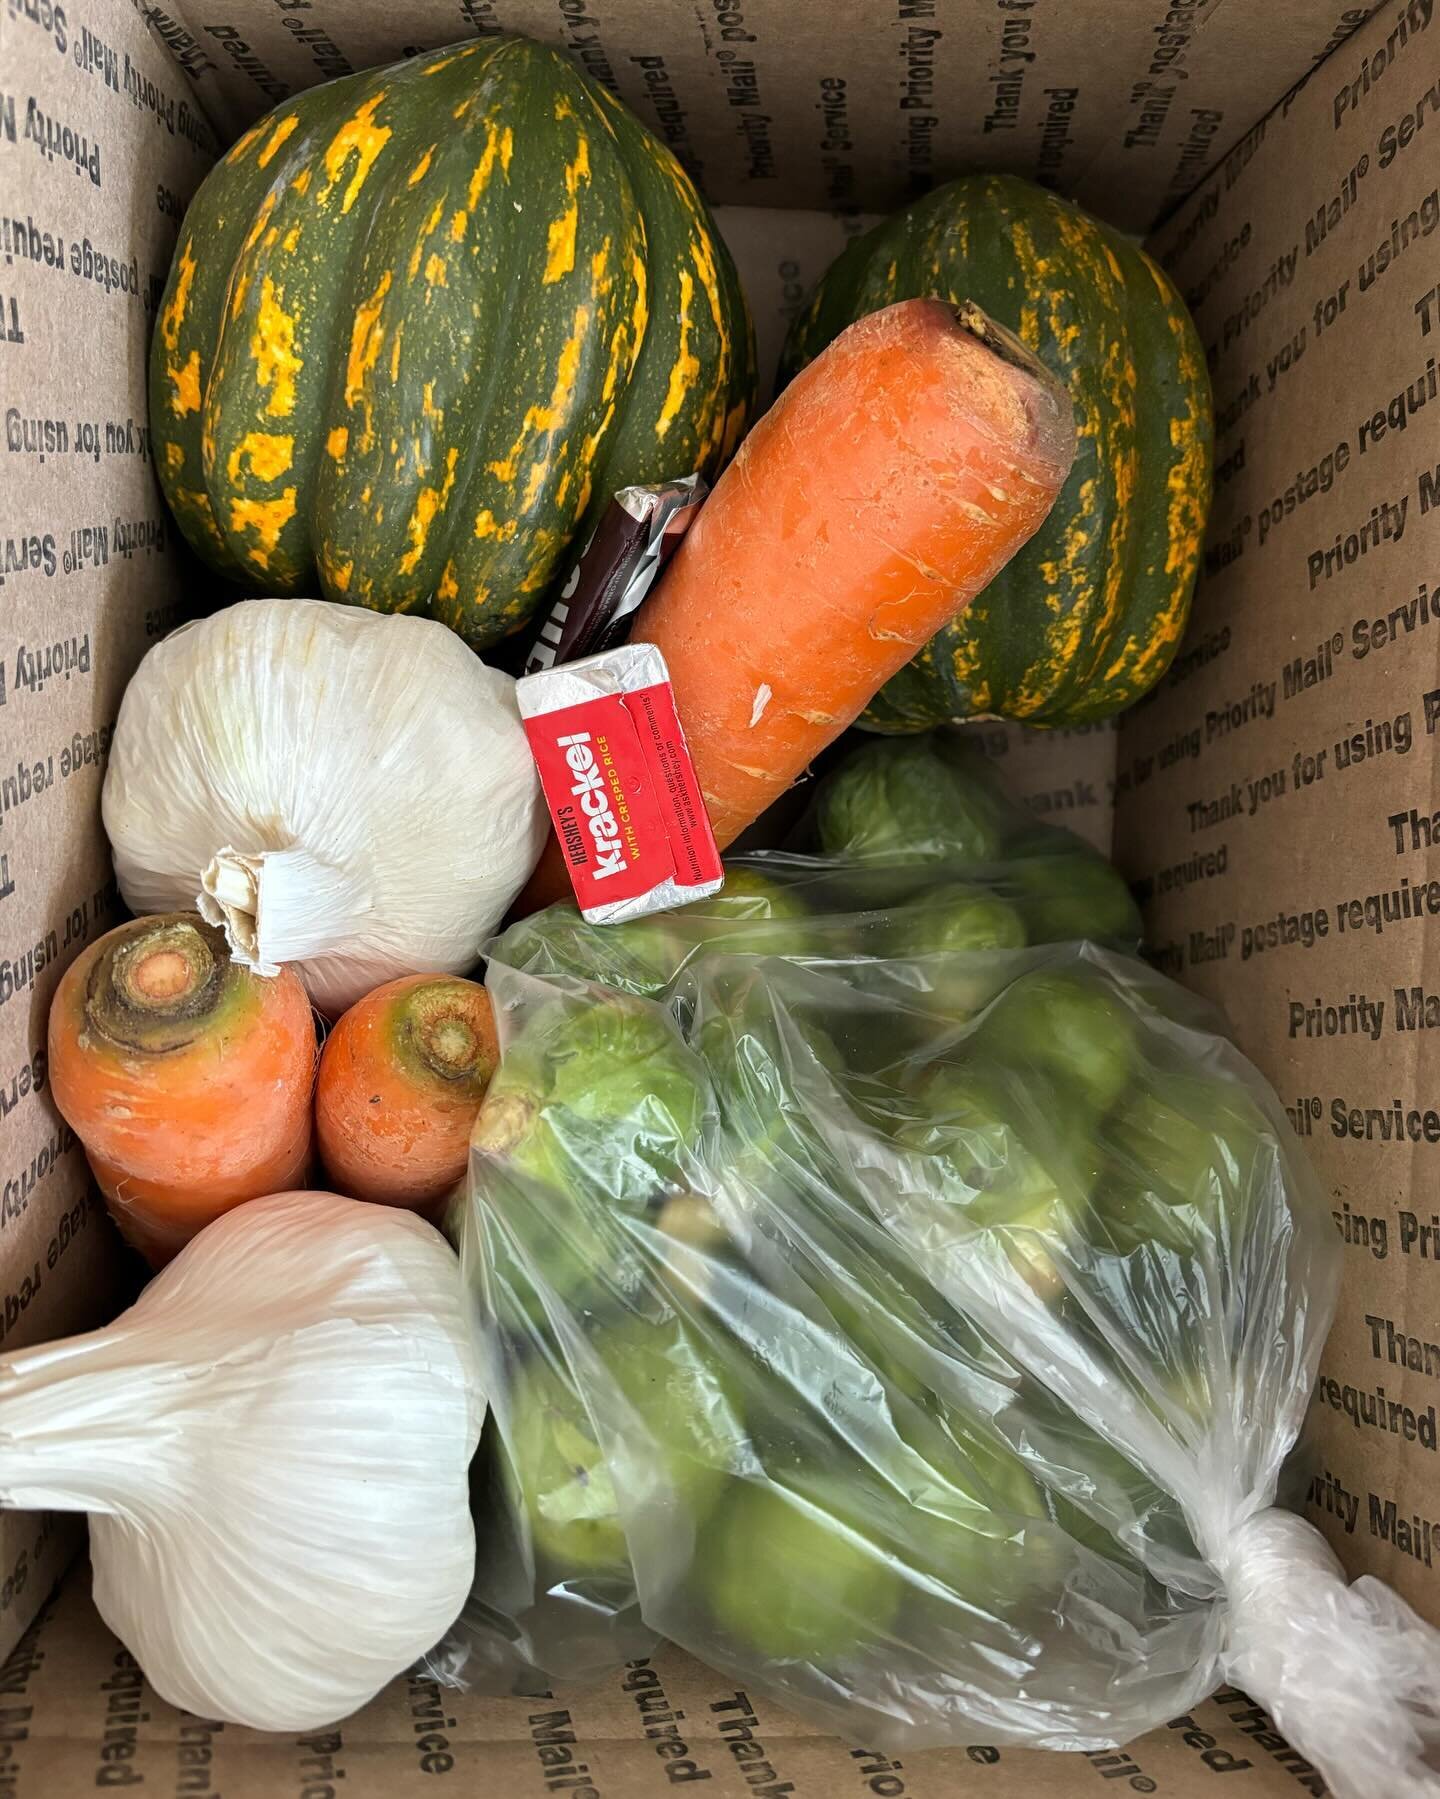 February CSA went out yesterday! Thanks to our friends at @brooklynsupportedagriculture for getting us the freshest veggies!
Squash, brussel sprouts, carrots, garlic, and cookies! And some vday candy~